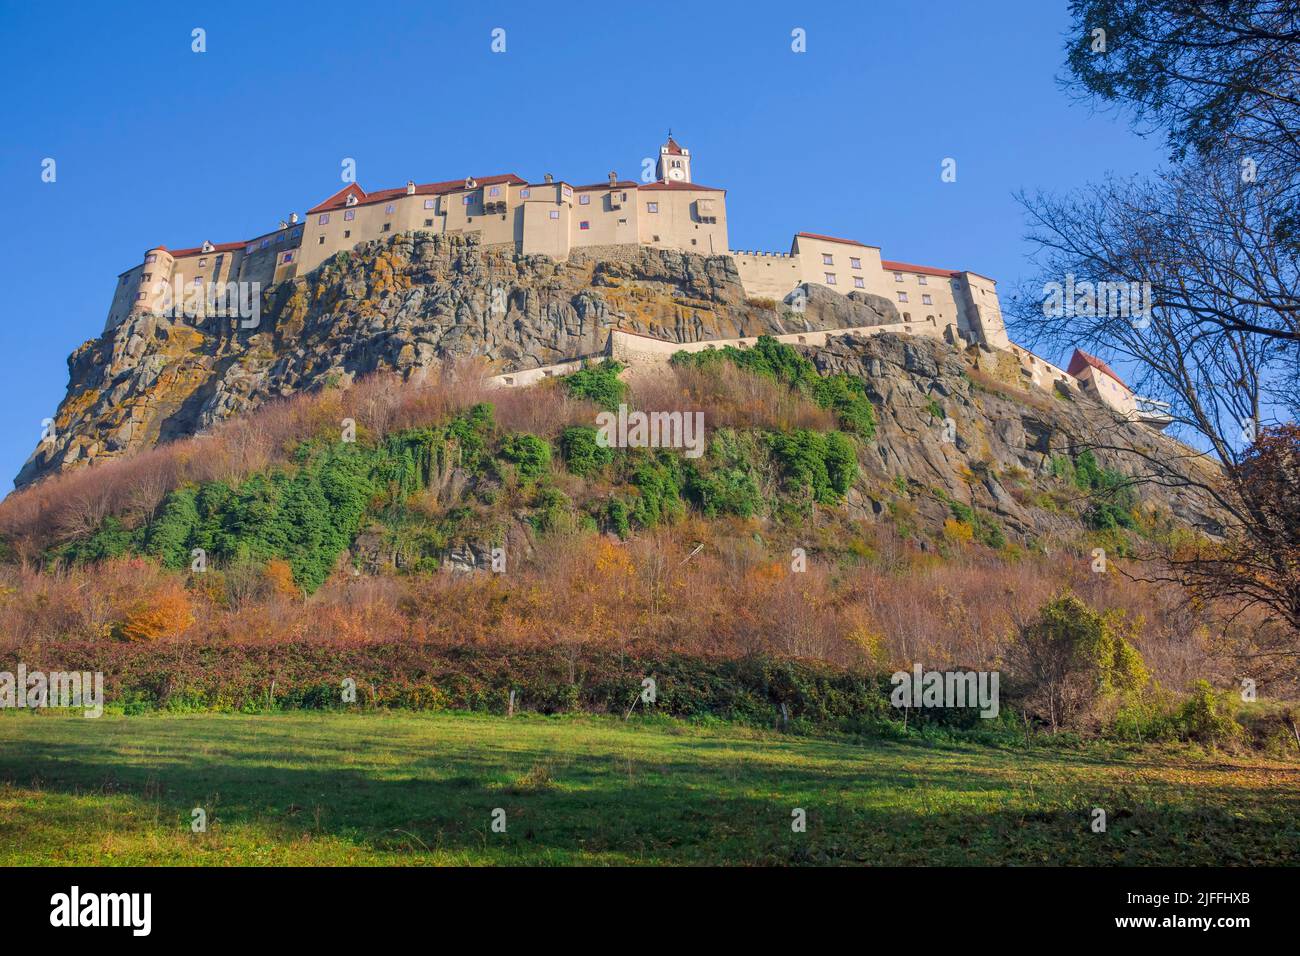 The medieval Riegersburg Castle on top of a dormant volcano, surrounded by beautiful autumn landscape, famous tourist attraction in Styria region, Aus Stock Photo